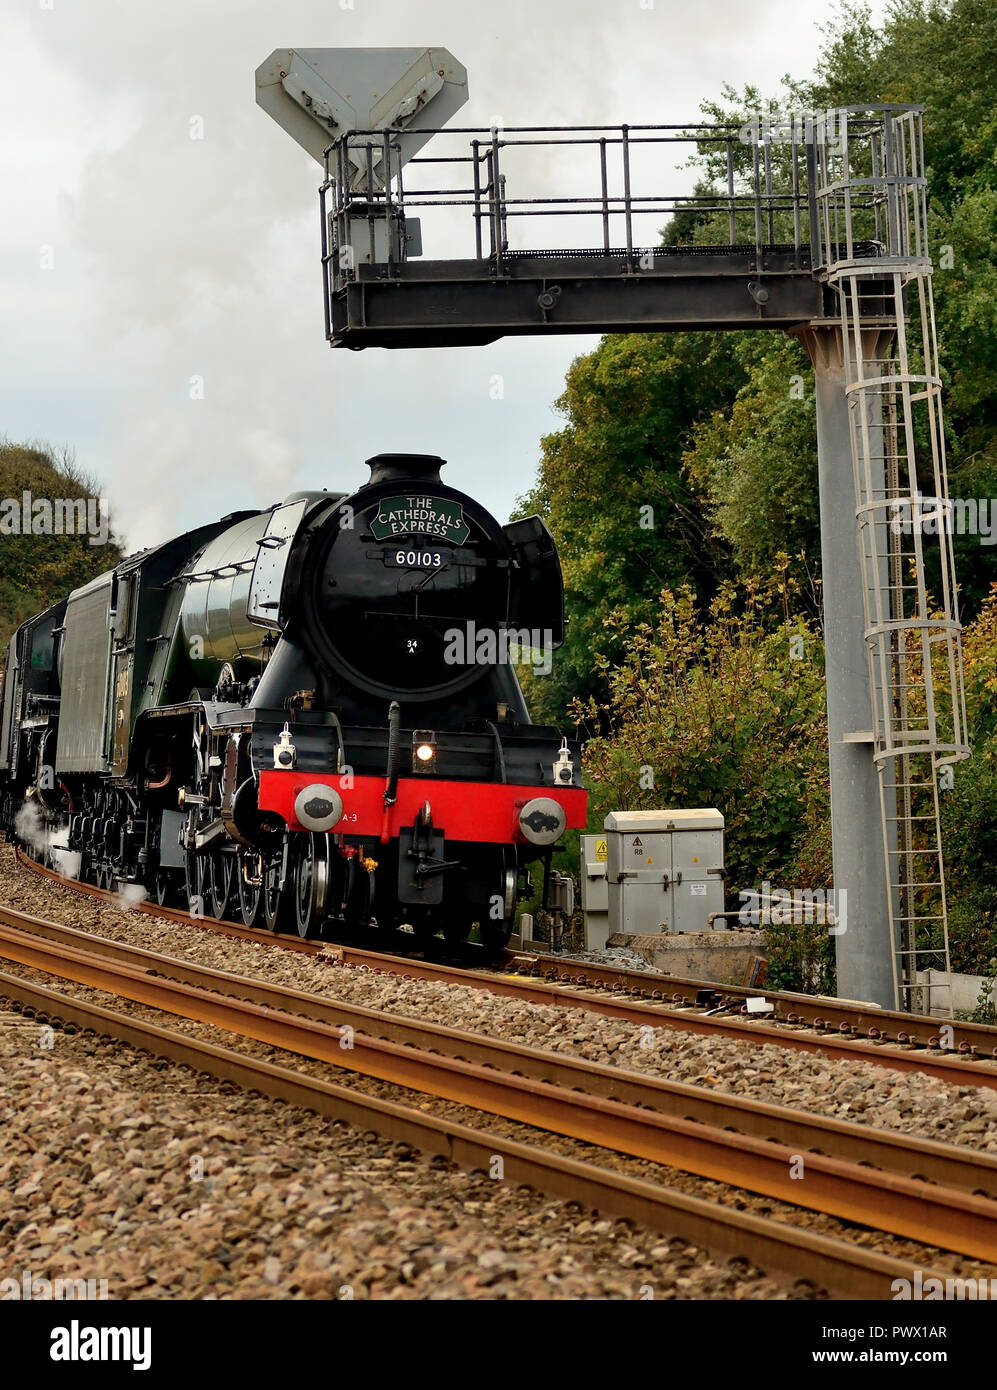 Celebrity LNER Class A3 Pacific No 60103 Flying Scotsman passing a signal gantry at Dawlish Warren, hauling the Cathedrals Express, 8th October 2018. Stock Photo